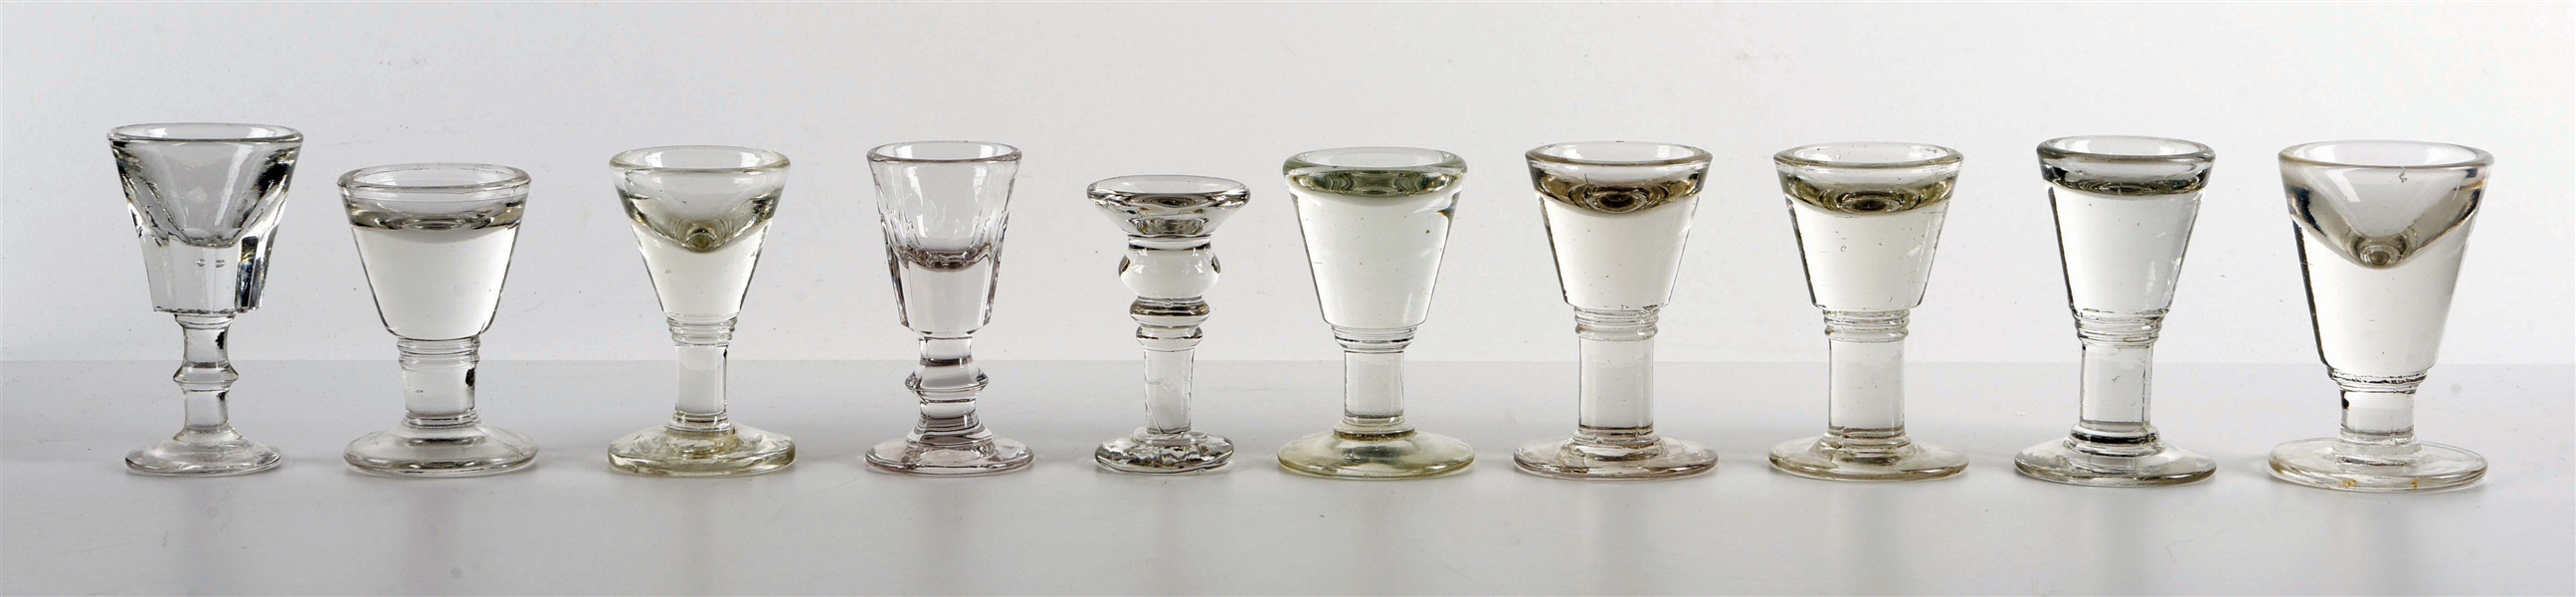 COLLECTION OF 10: MISC. ICE CREAM PENNY LICK GLASSES. 